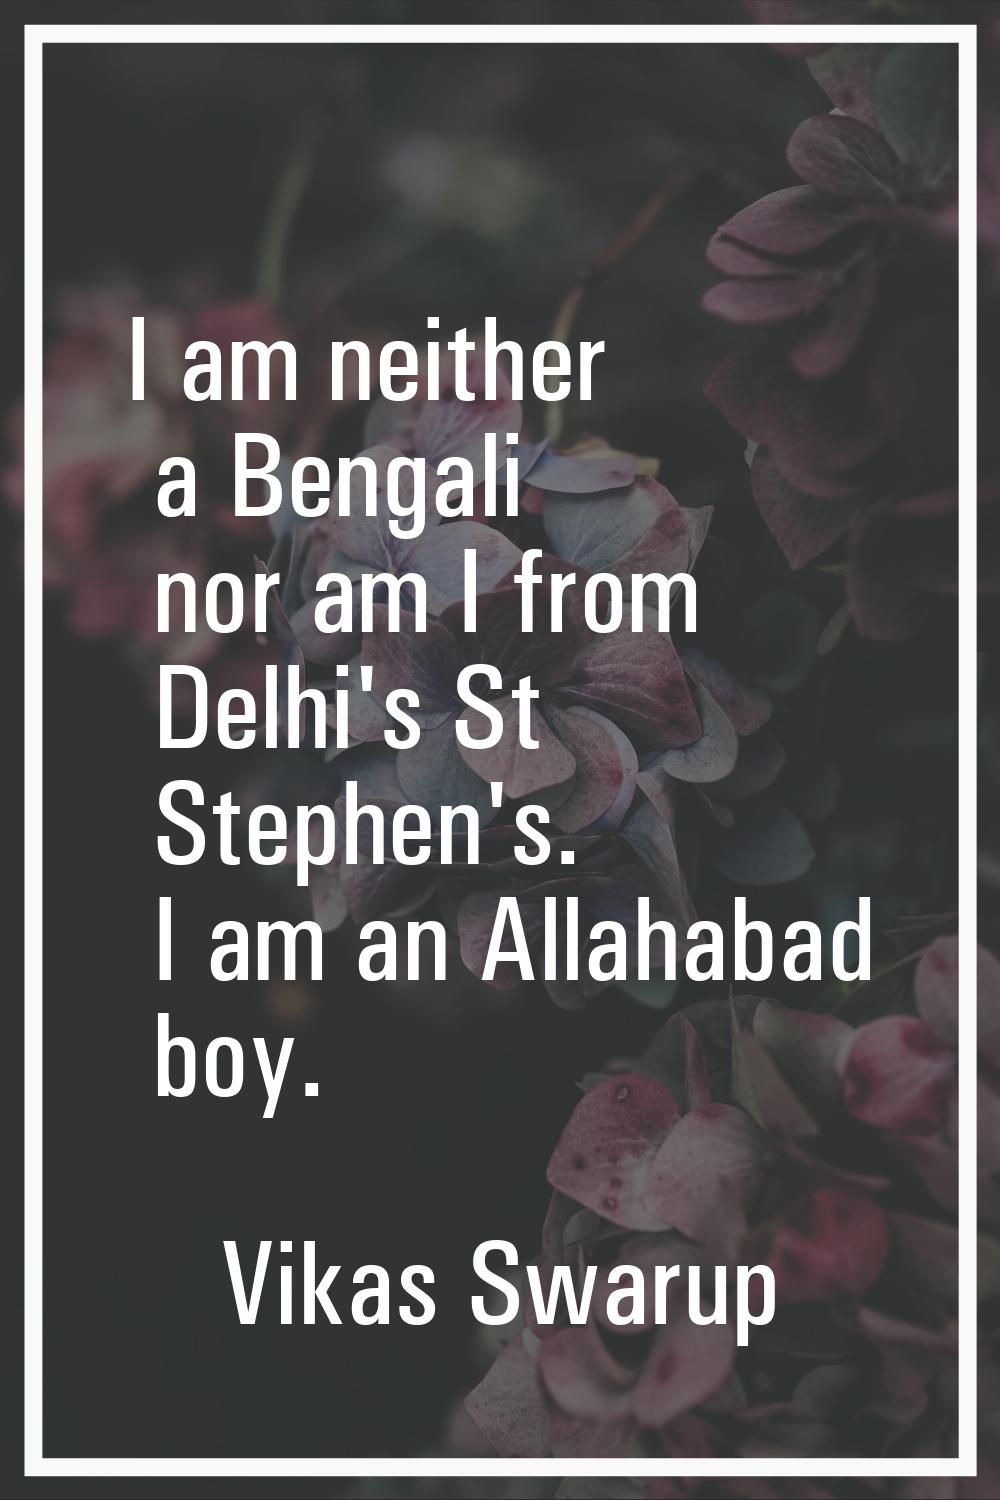 I am neither a Bengali nor am I from Delhi's St Stephen's. I am an Allahabad boy.